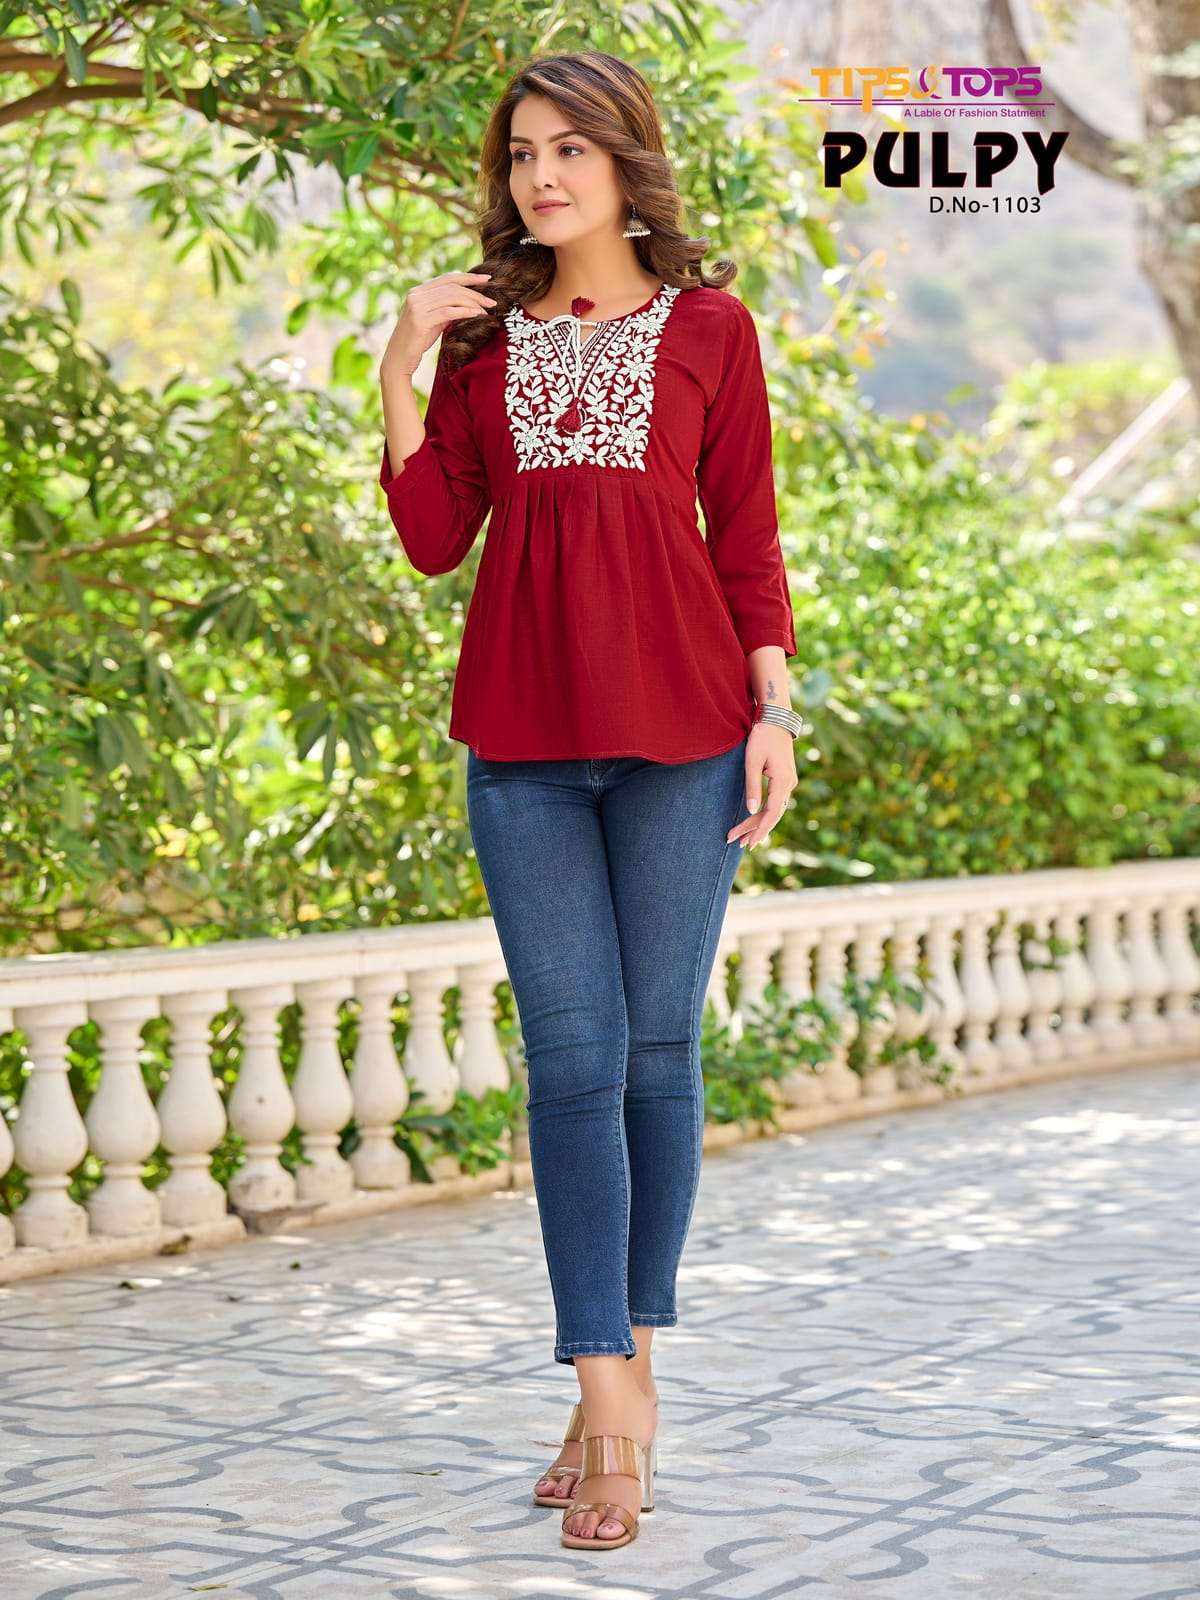 tips&tops pulpy vol-11 heavy rayon desoigner short tops collection wholesale price 